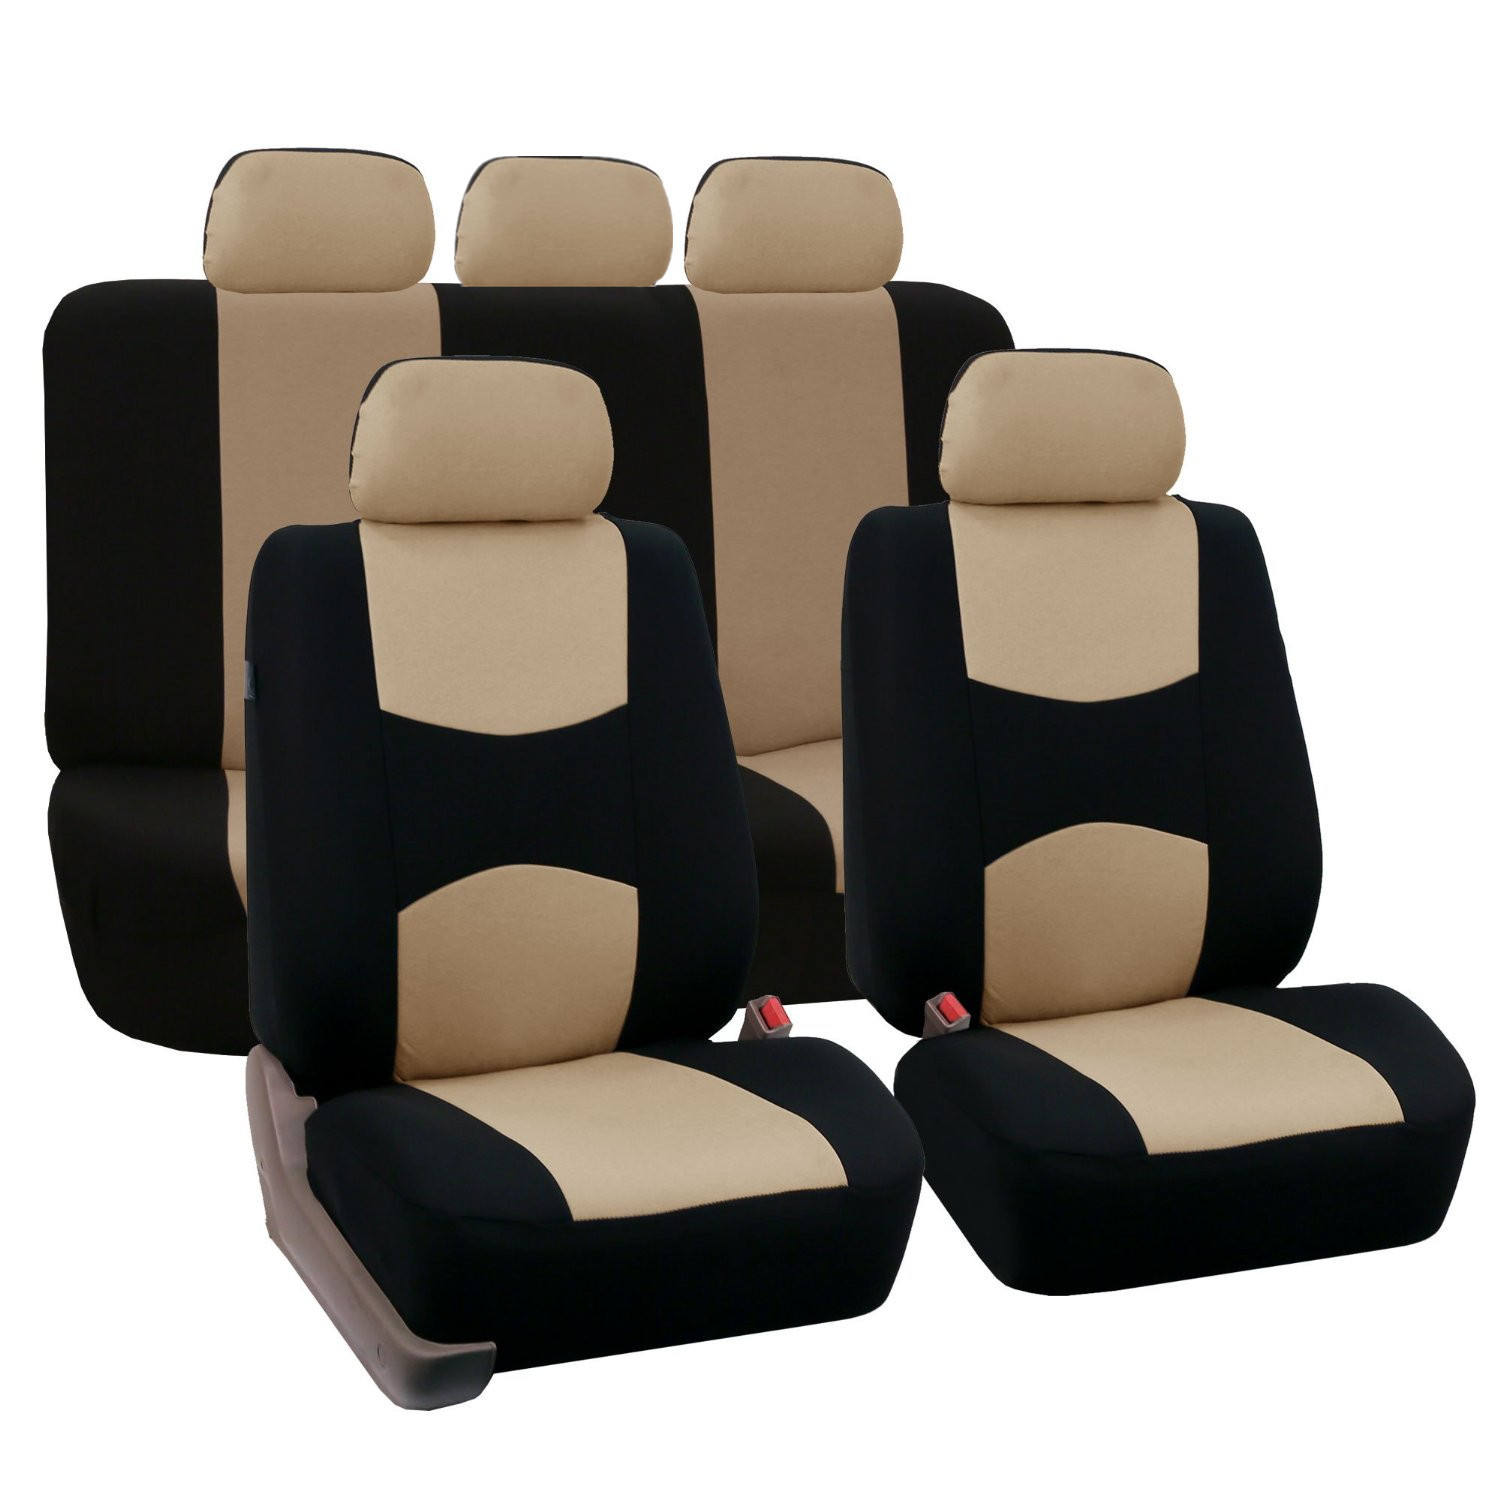 seat covers to protect from sweat Lexus